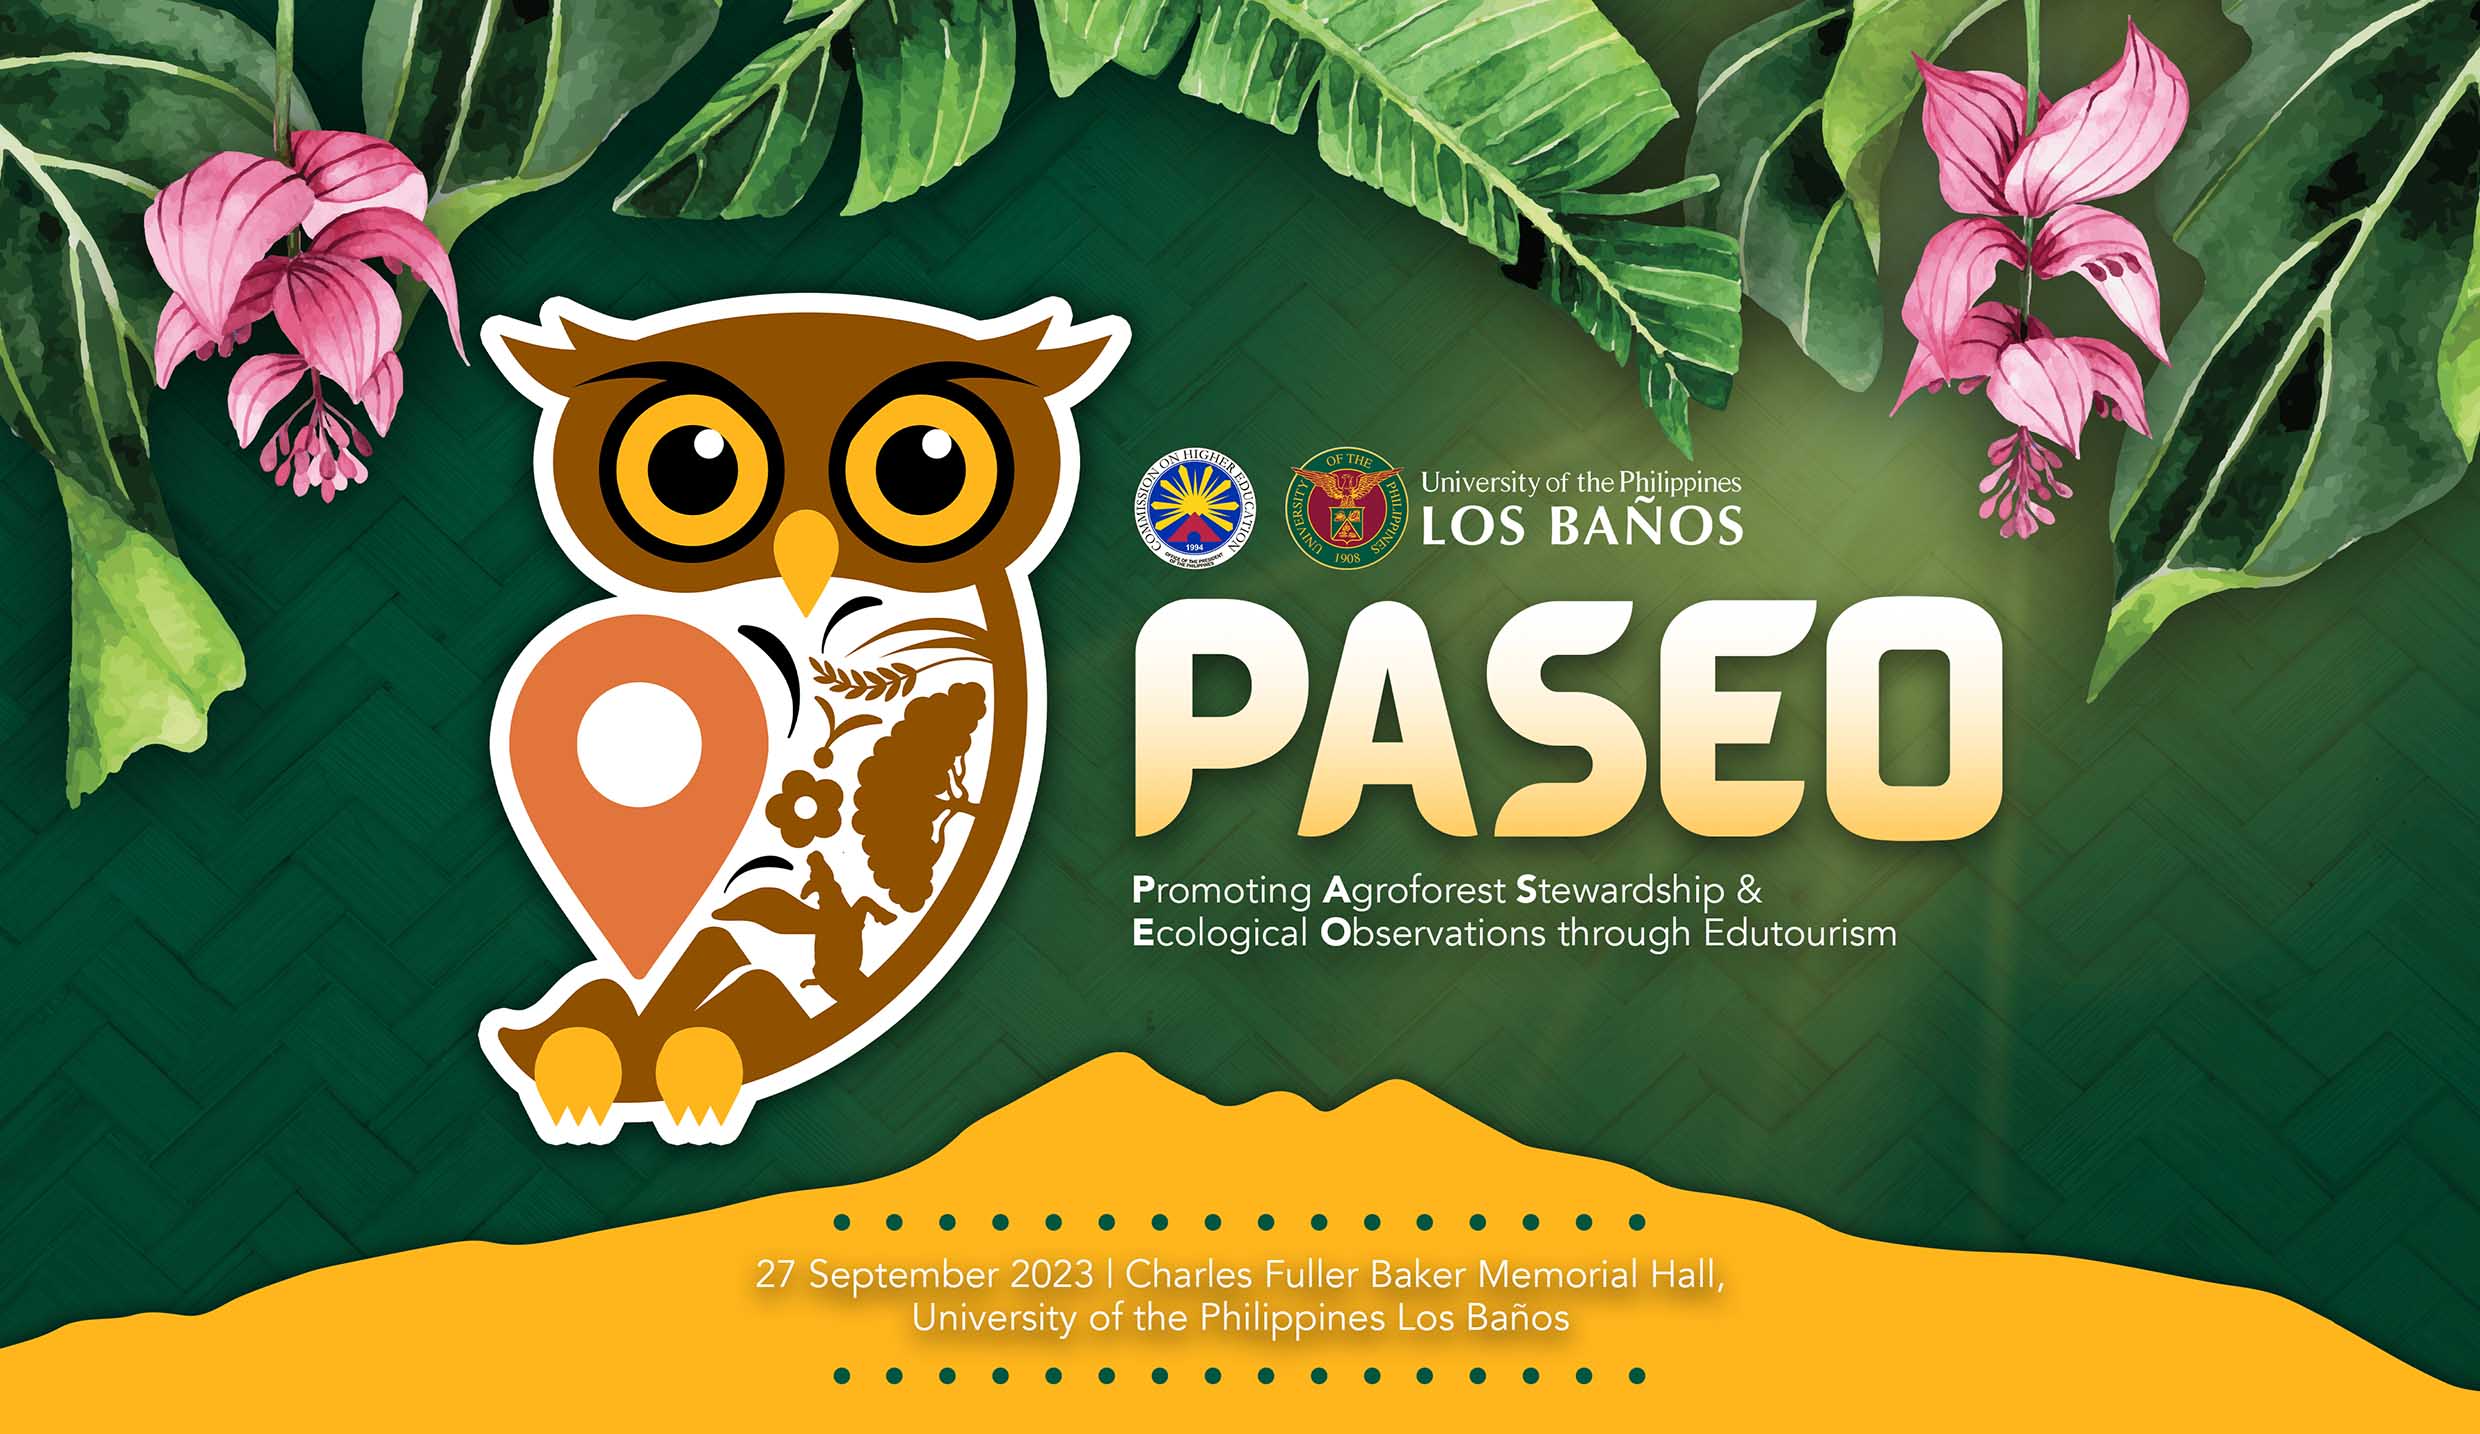 UPLB to launch CHED-funded PASEO edutourism program